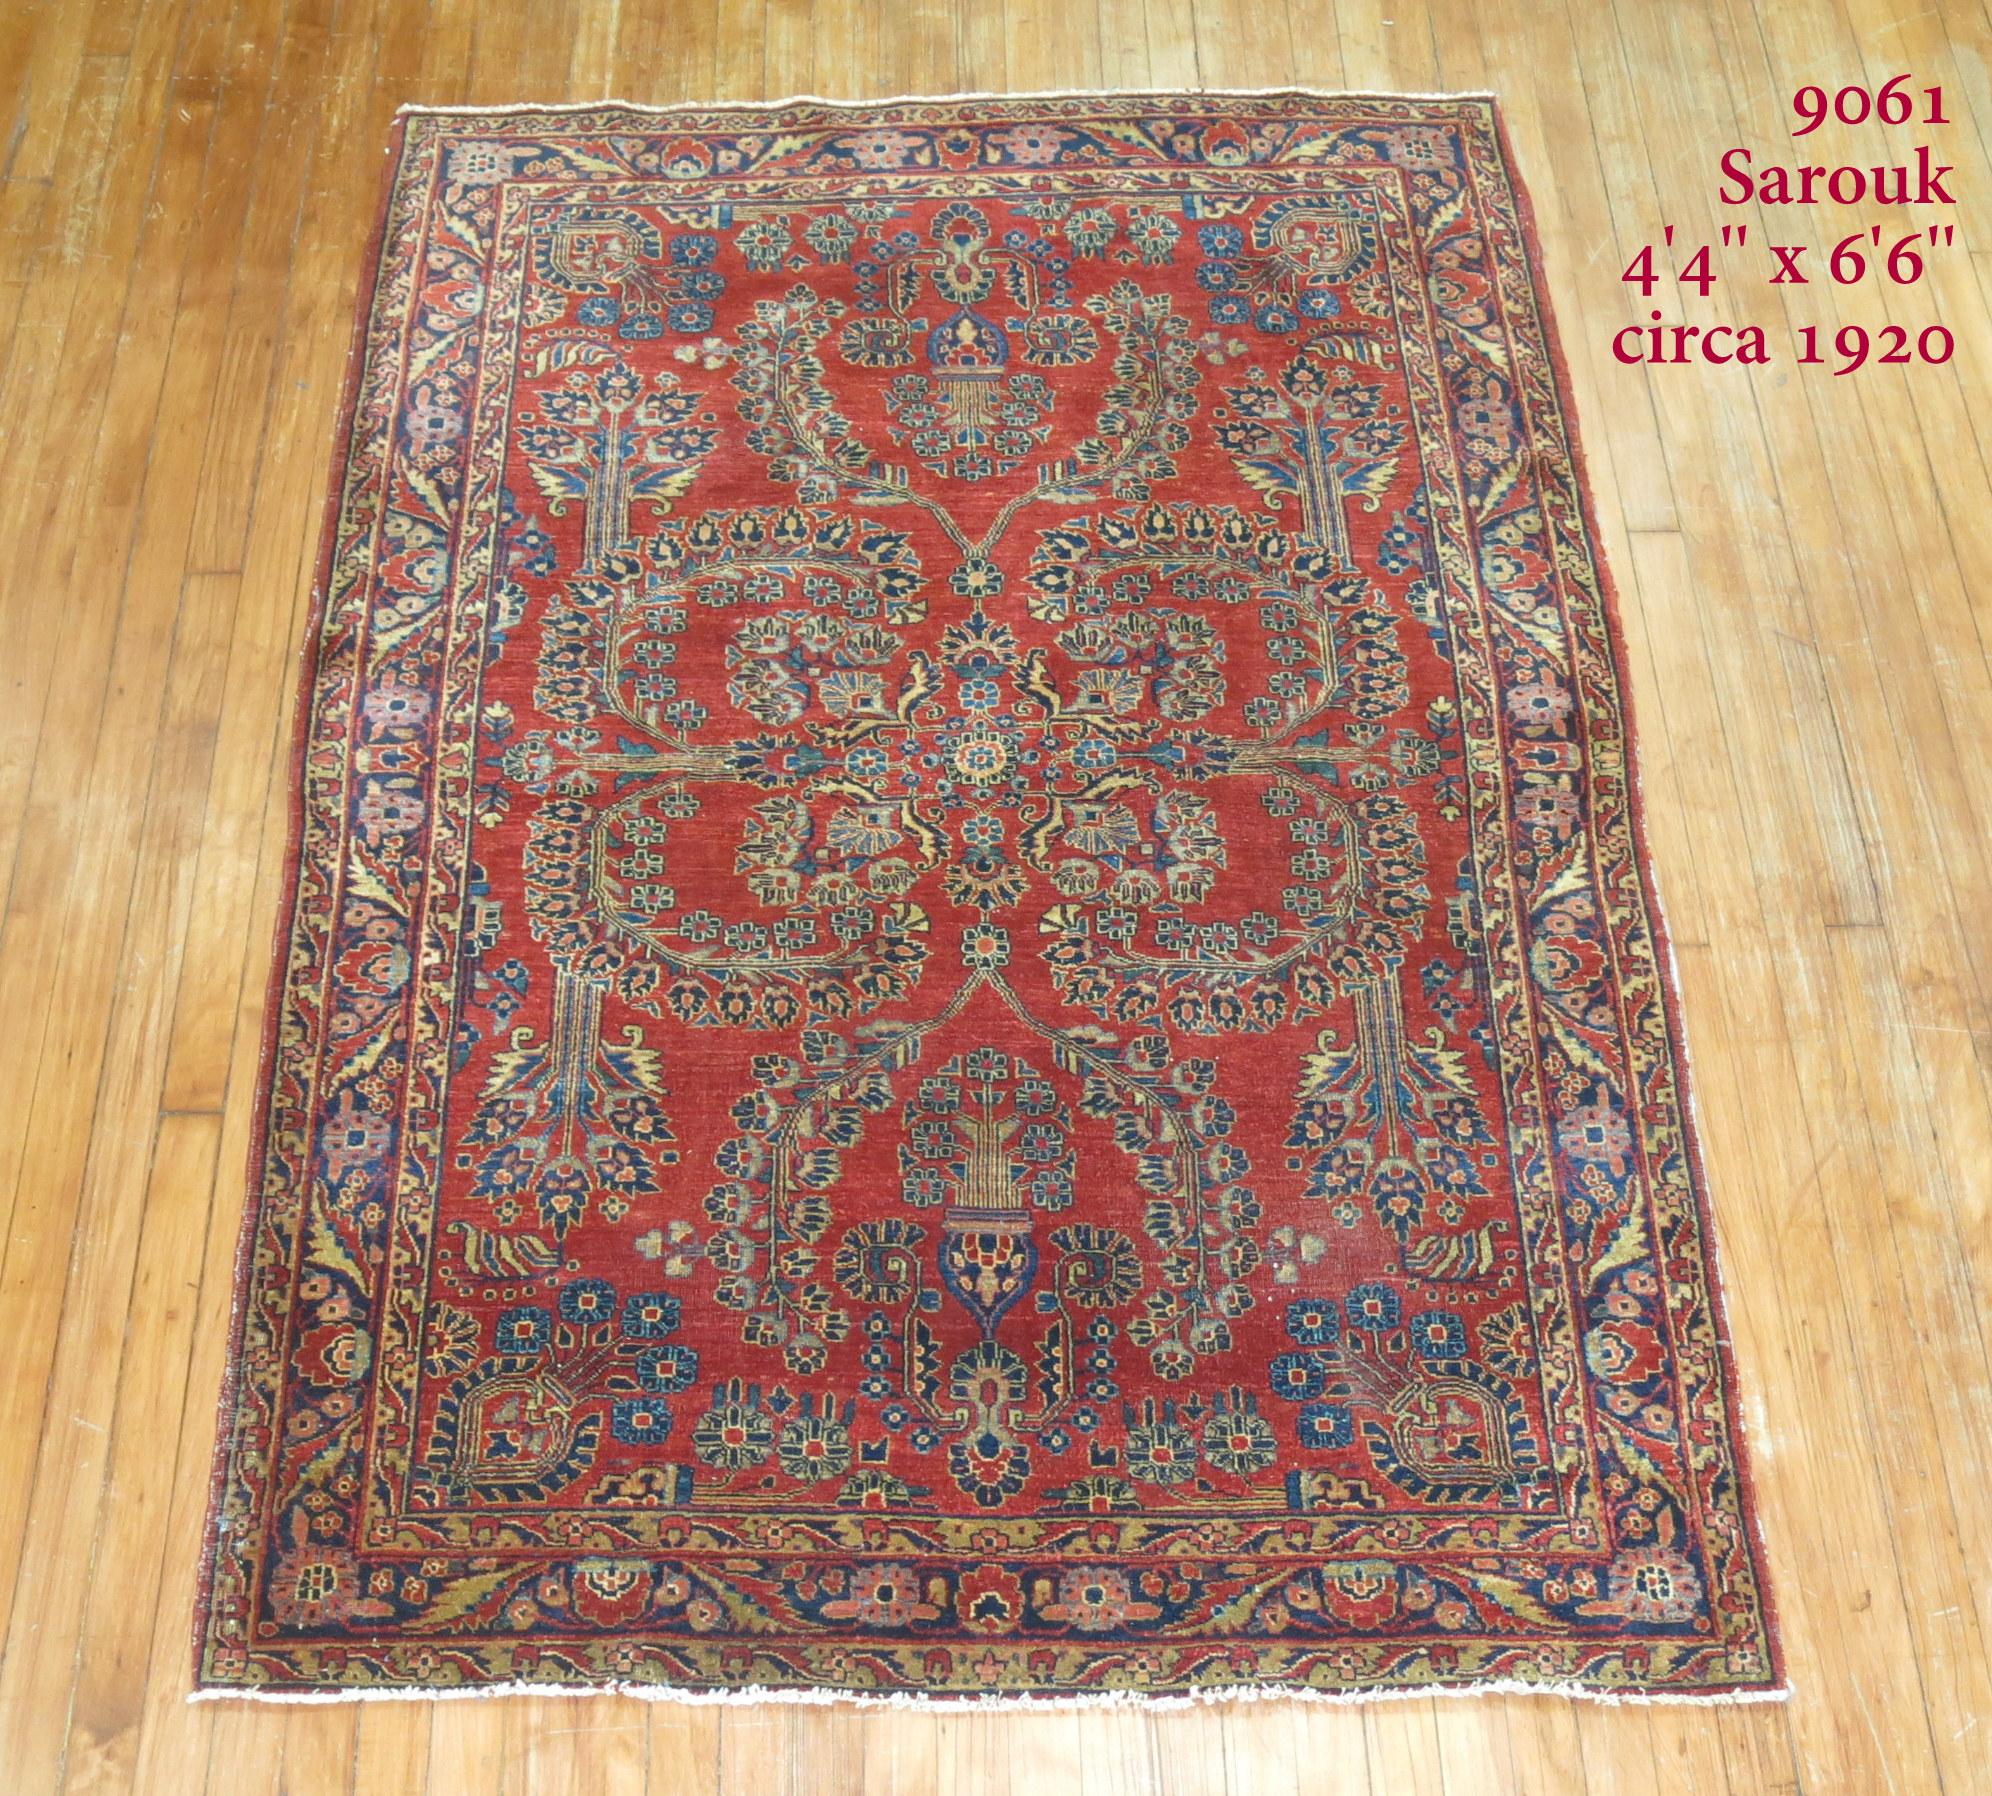 Zabihi Collection Exceptional Red Antique Mohajeran Persian Sarouk Rug For Sale 1